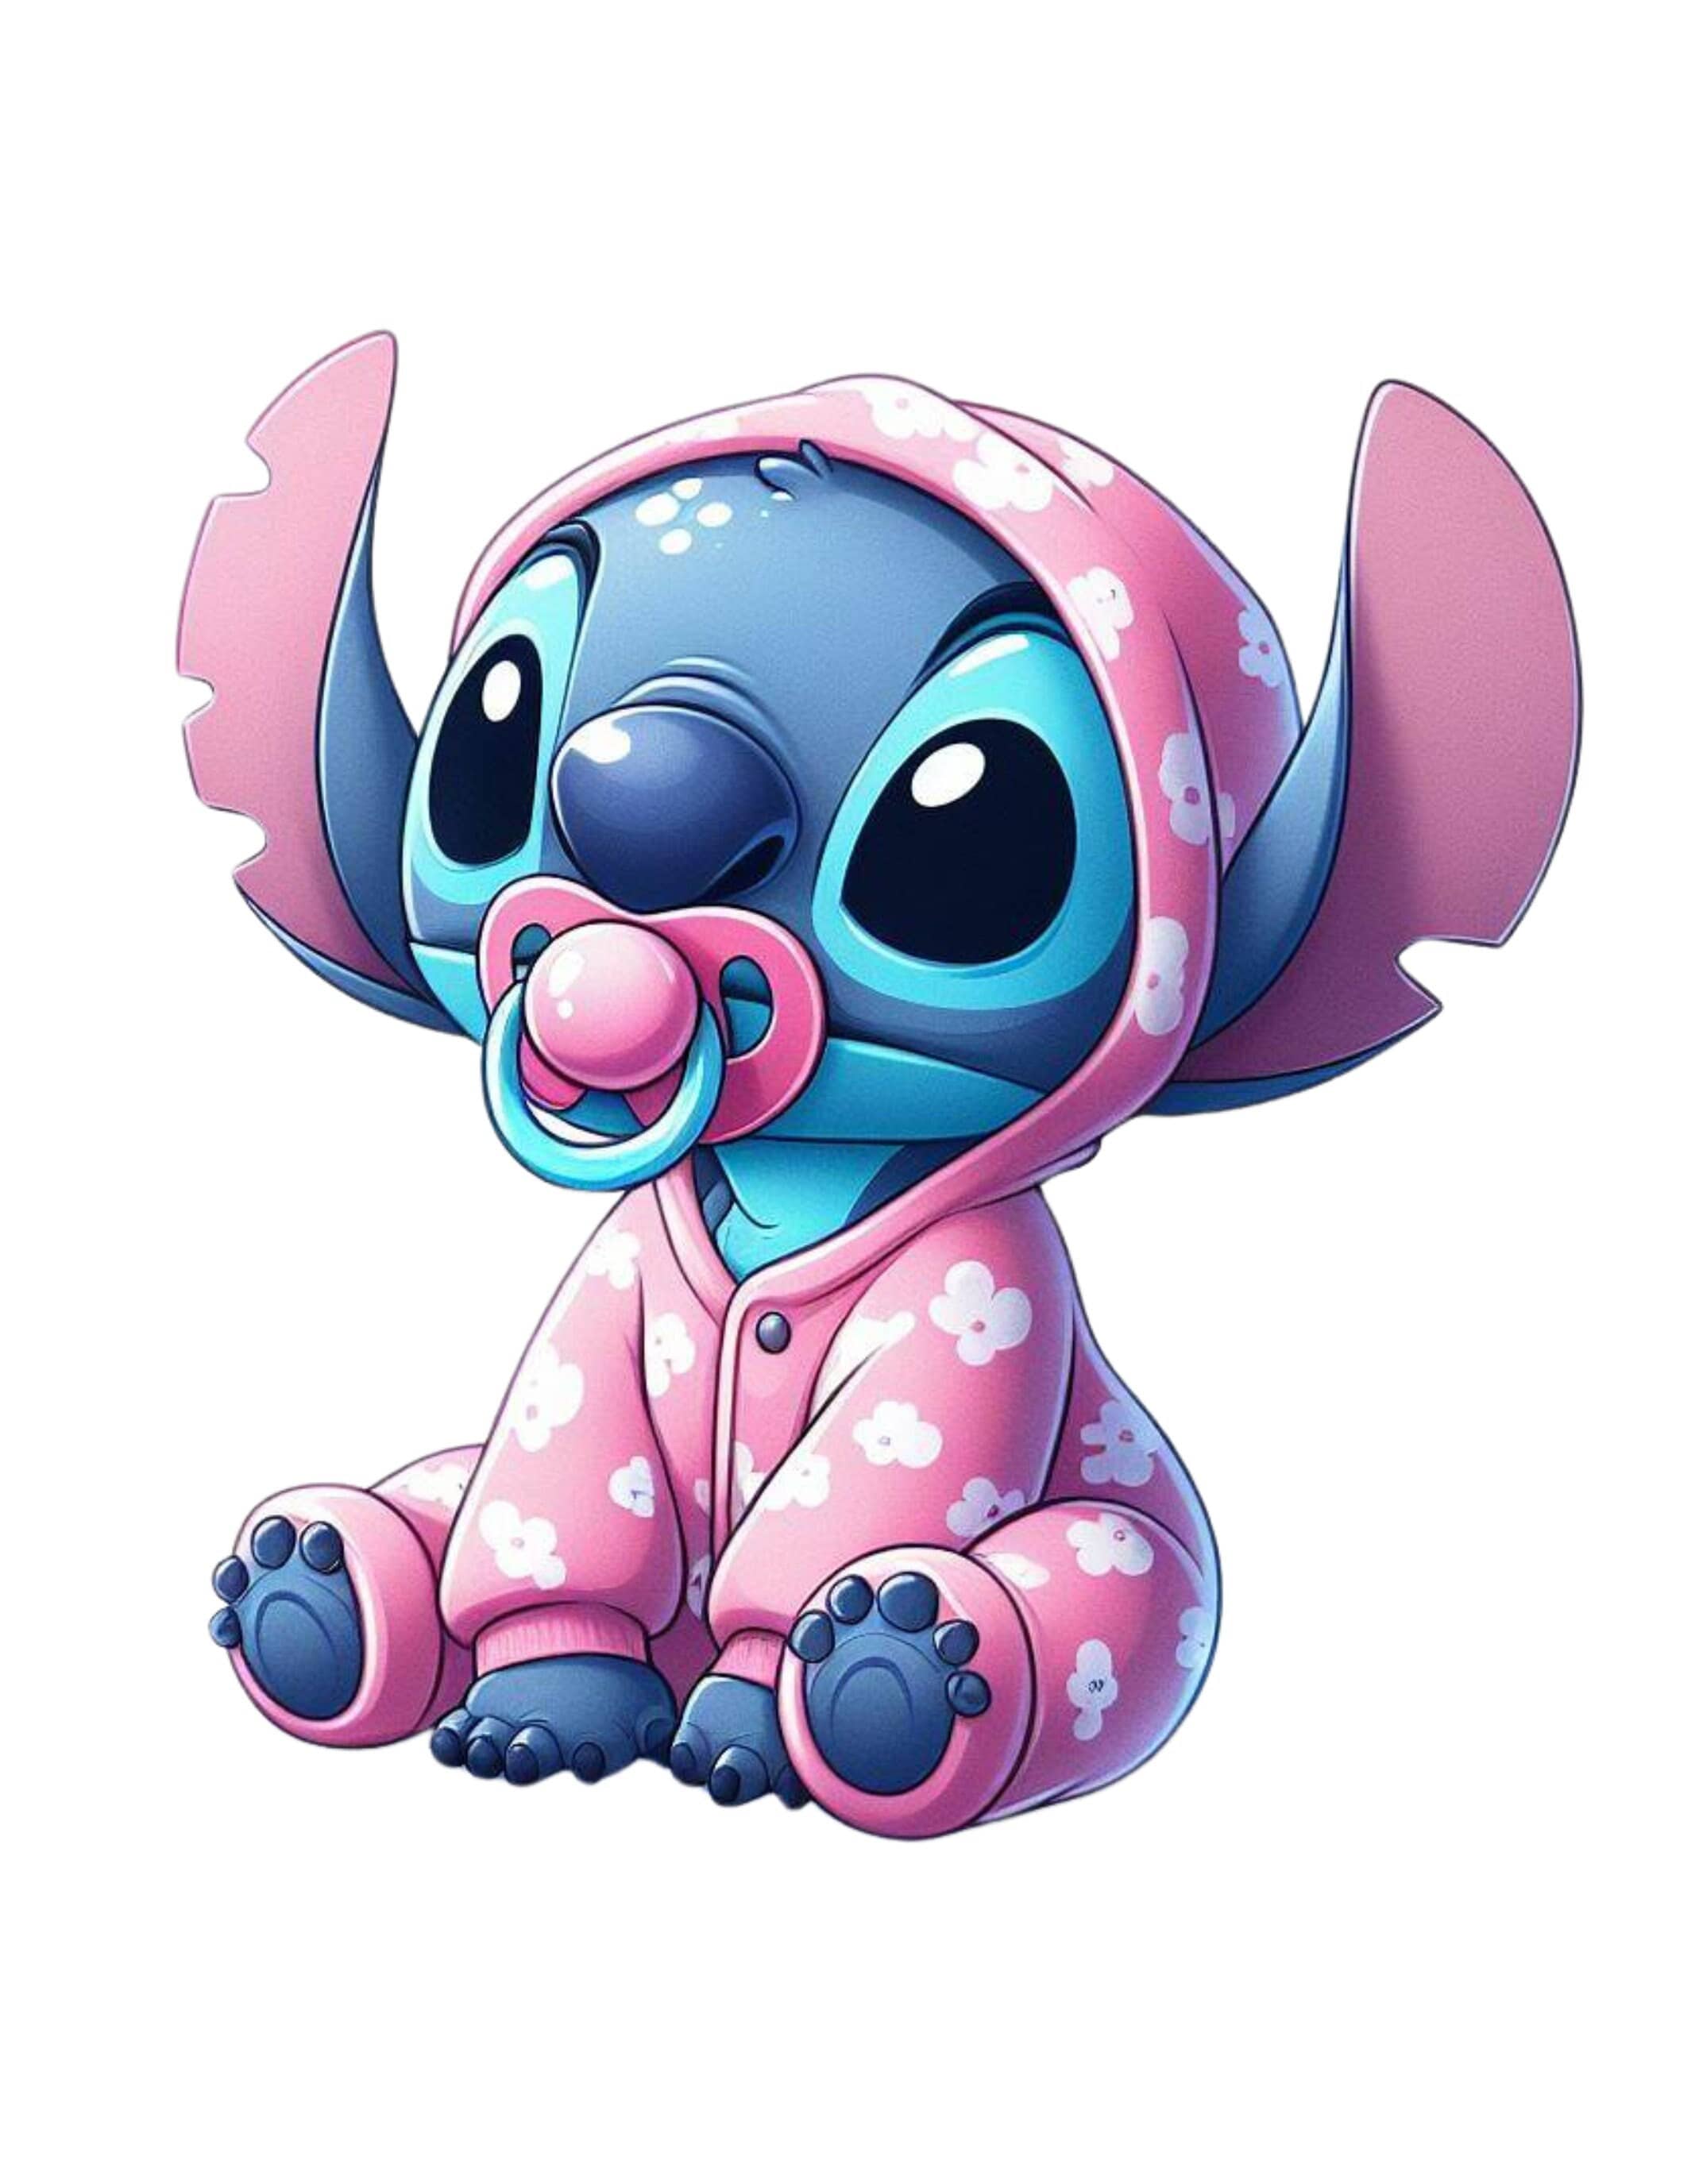 100+] Cute Baby Stitch Wallpapers